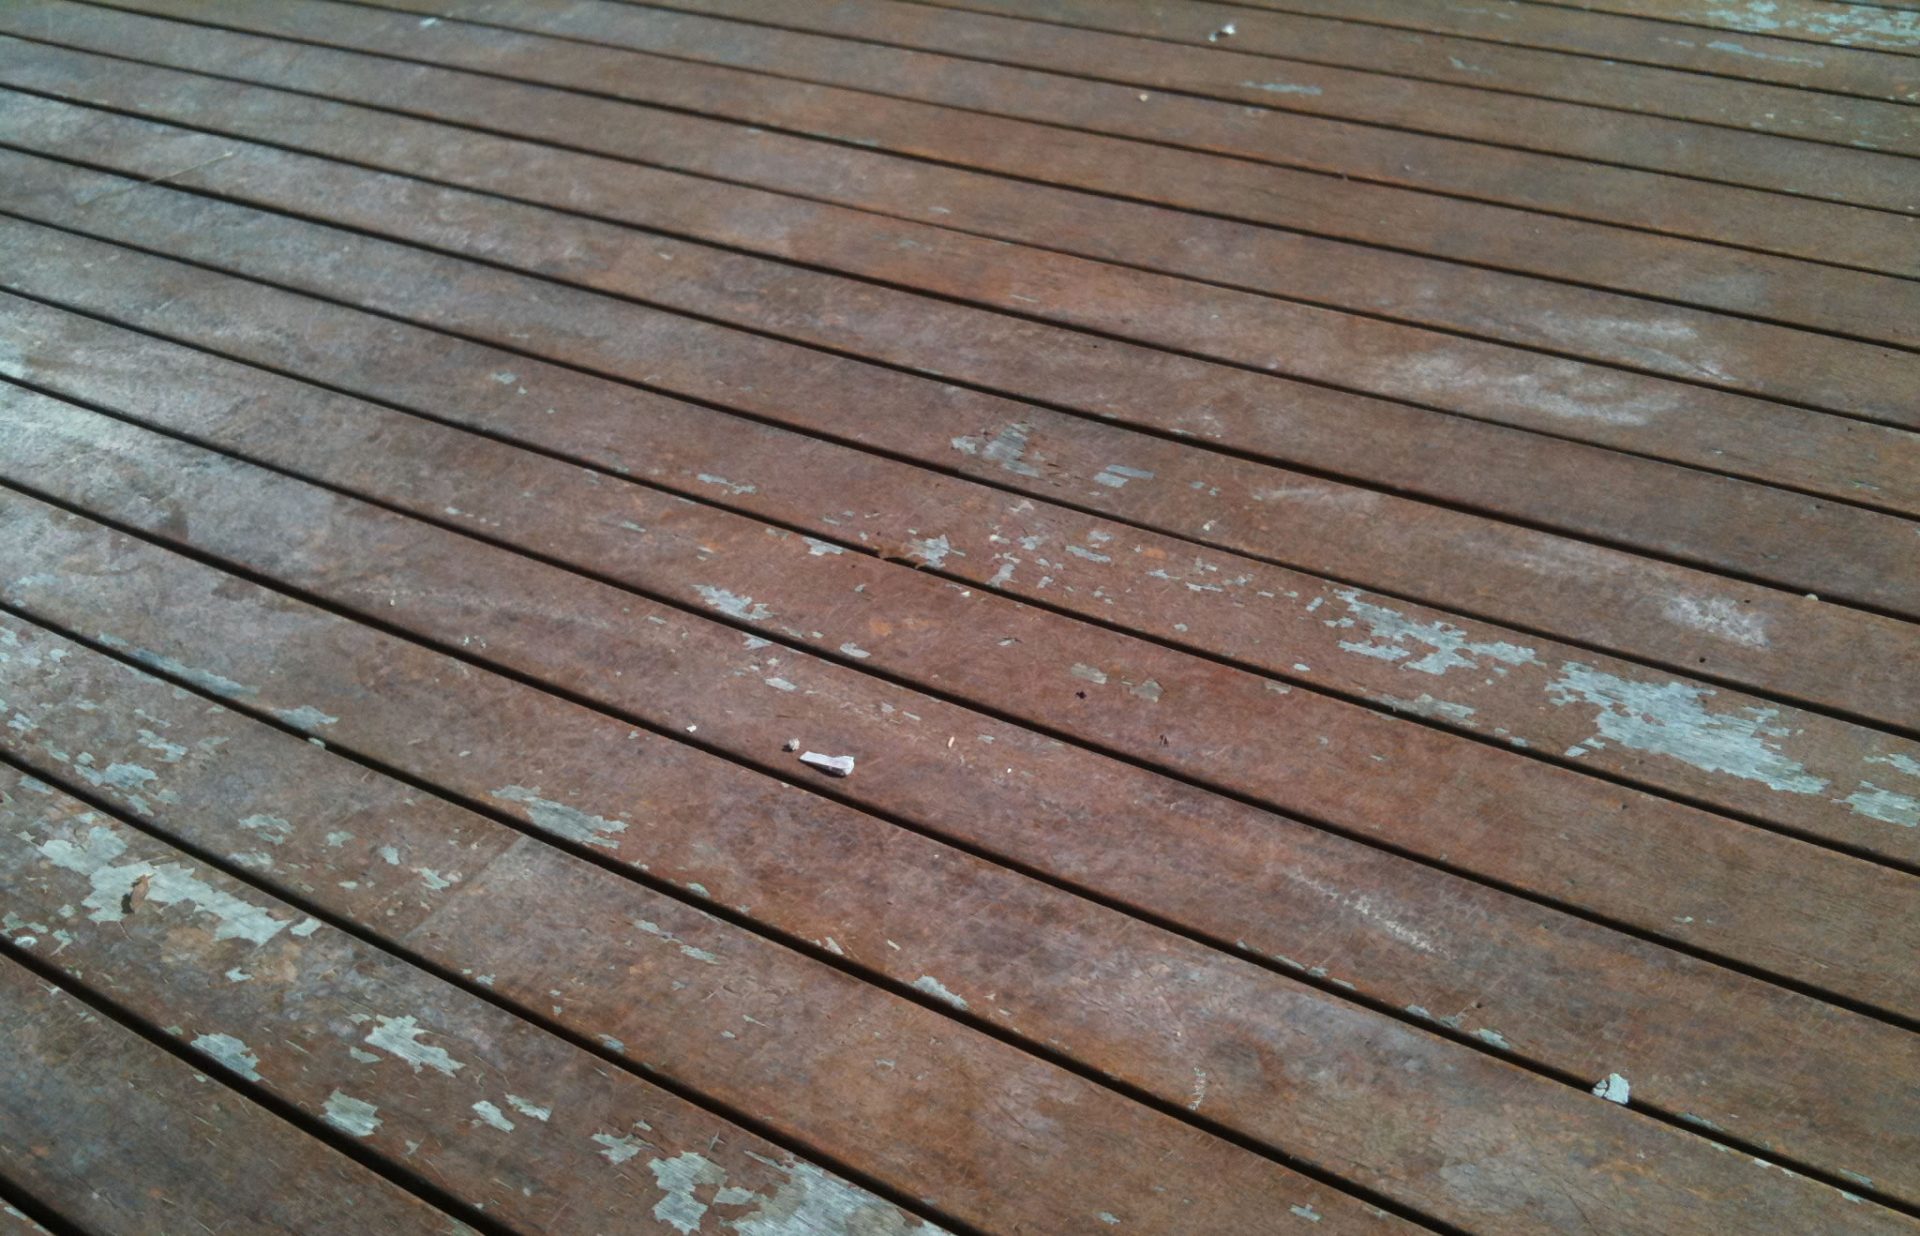 Stained dark timber deck with peeling marks